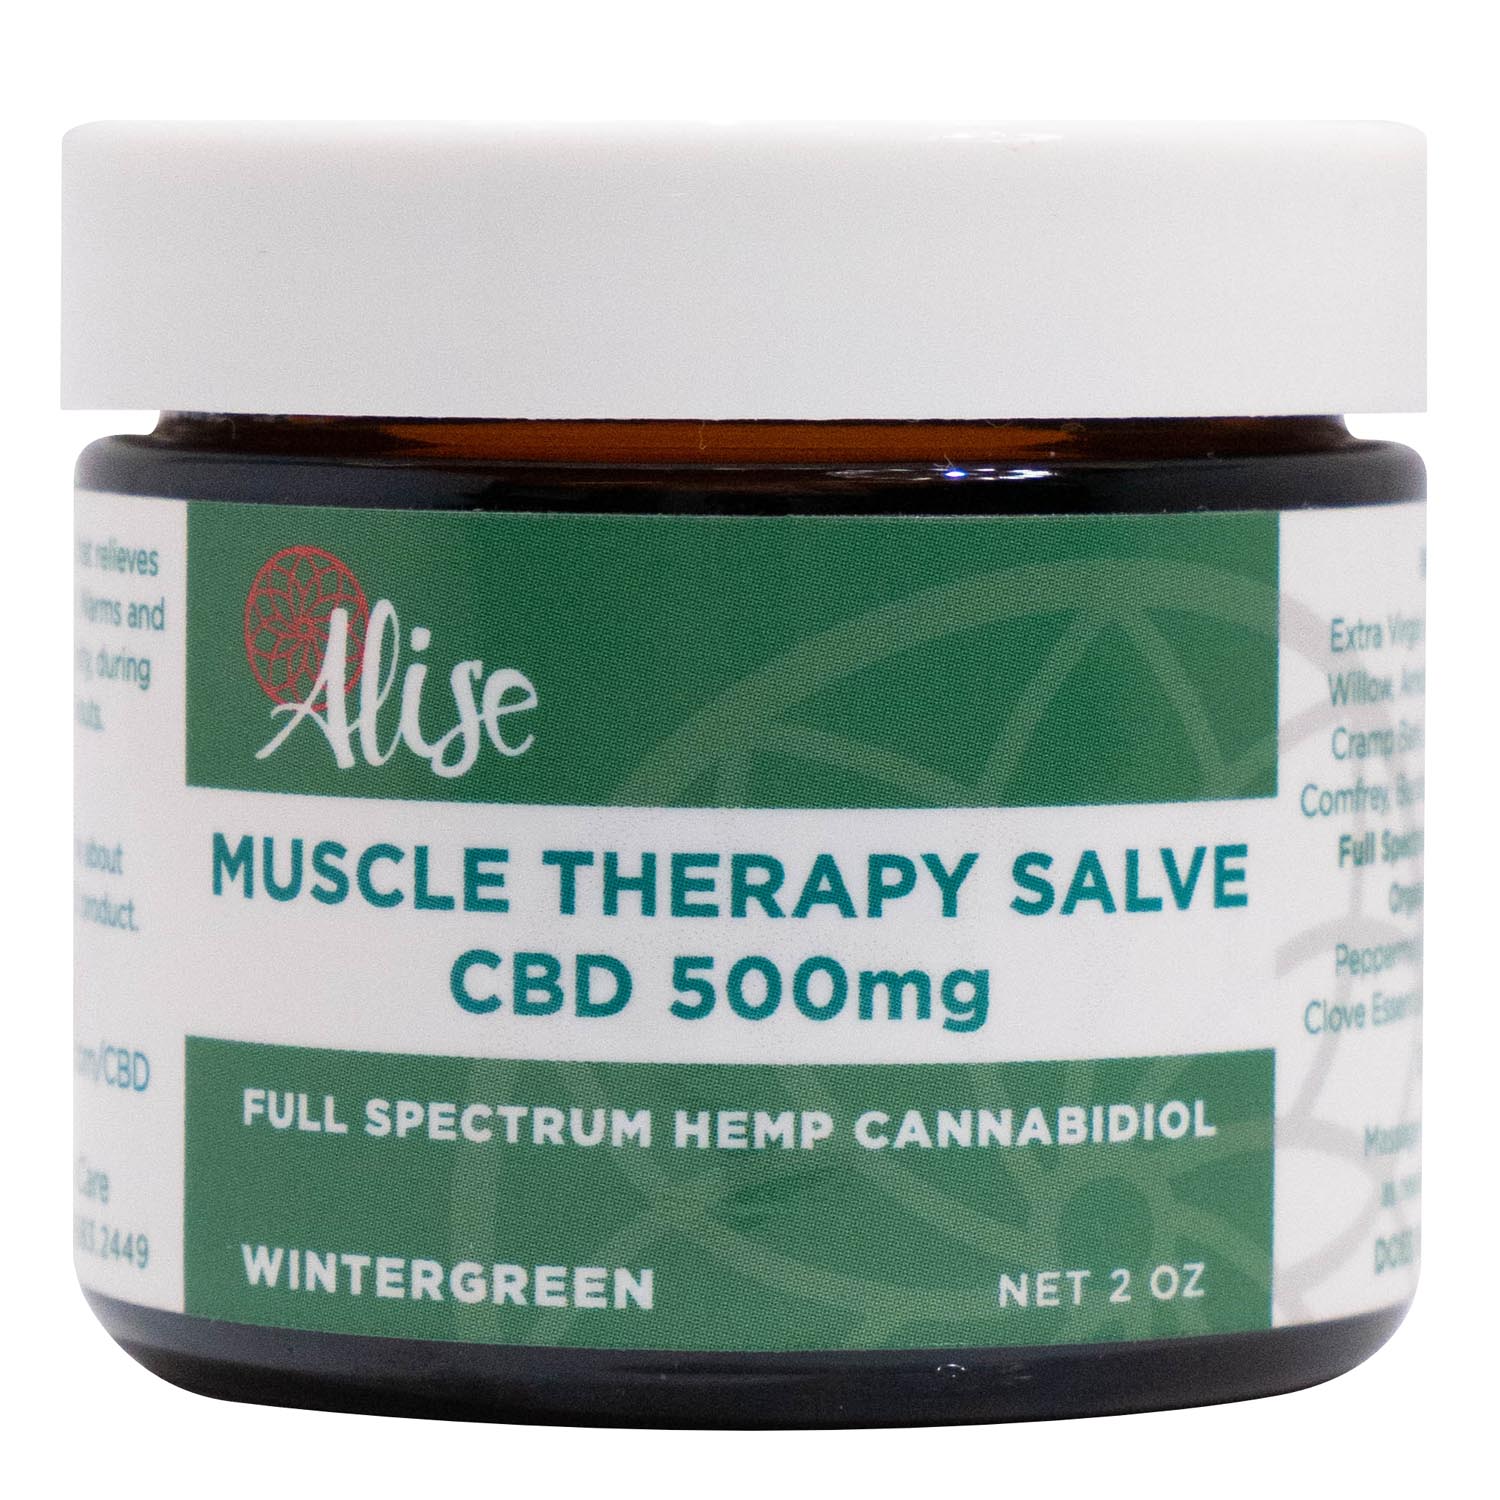 Muscle Therapy Salve CBD 500mg Wintergreen 2oz Jar handcrafted by Alise Body Care